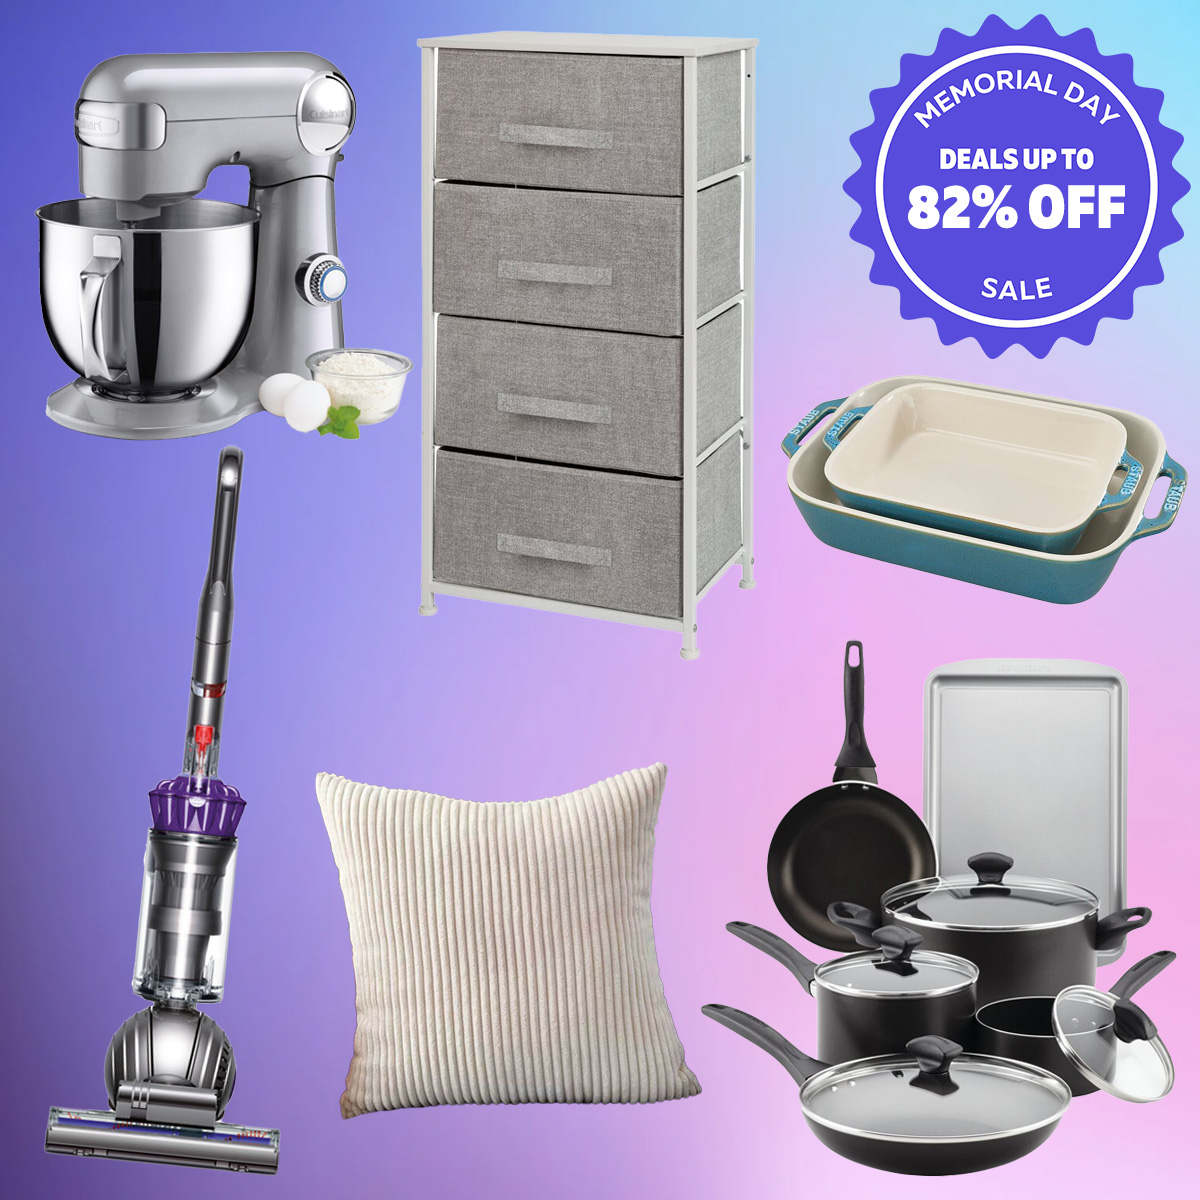 Spice up your kitchen with Wayfair's Clearance Sale - get deals on